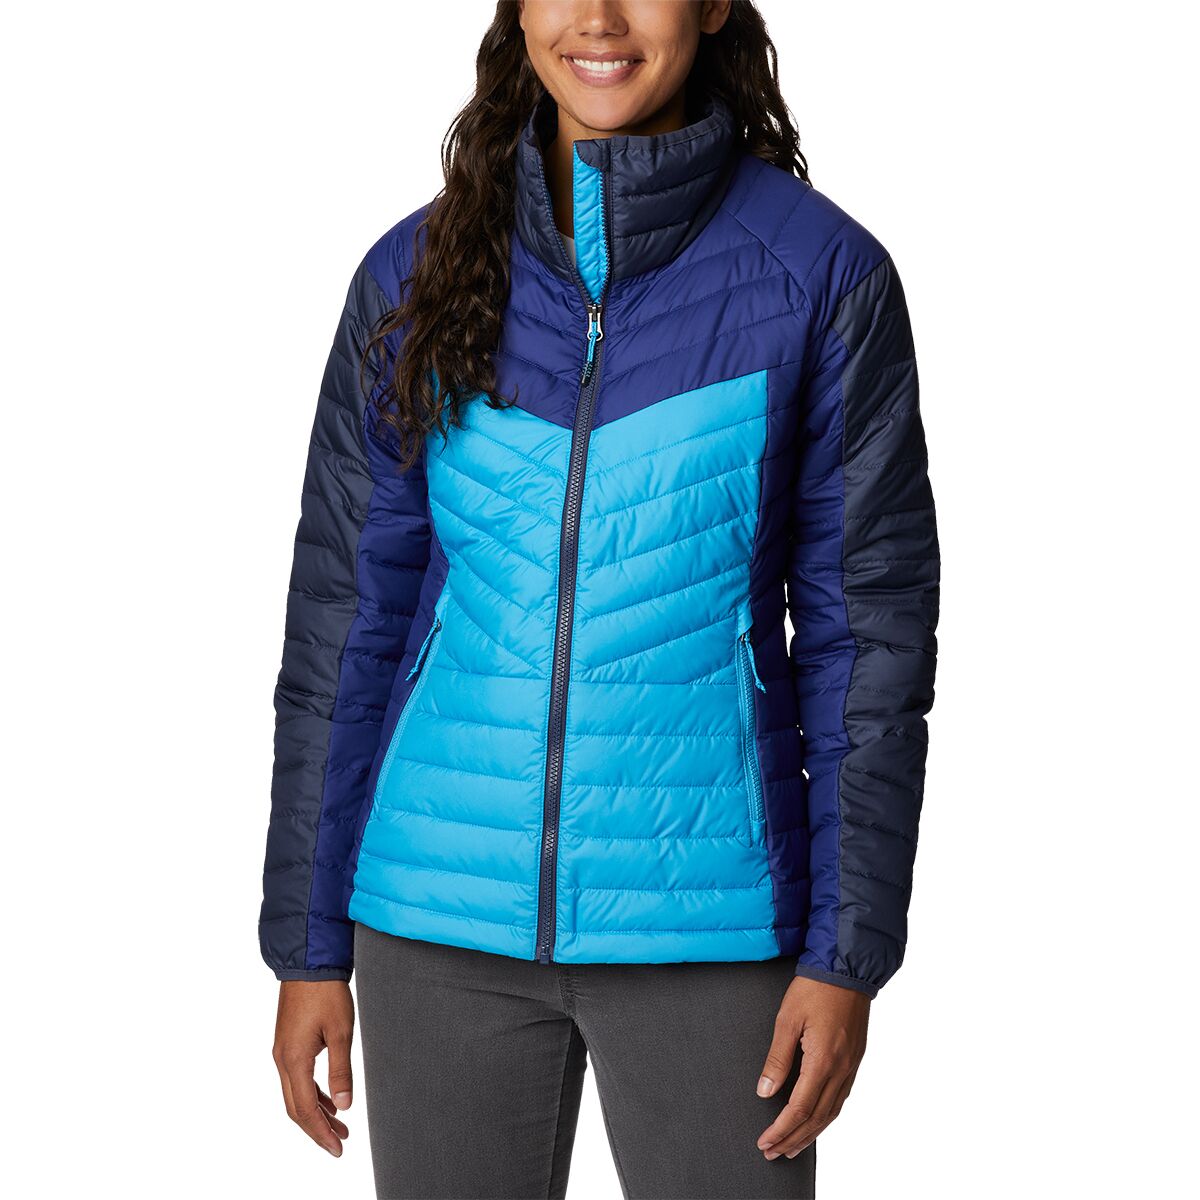 XS, COLUMBIA Puffect Jacket Mujer - Nocturnal/White/Spring Blue